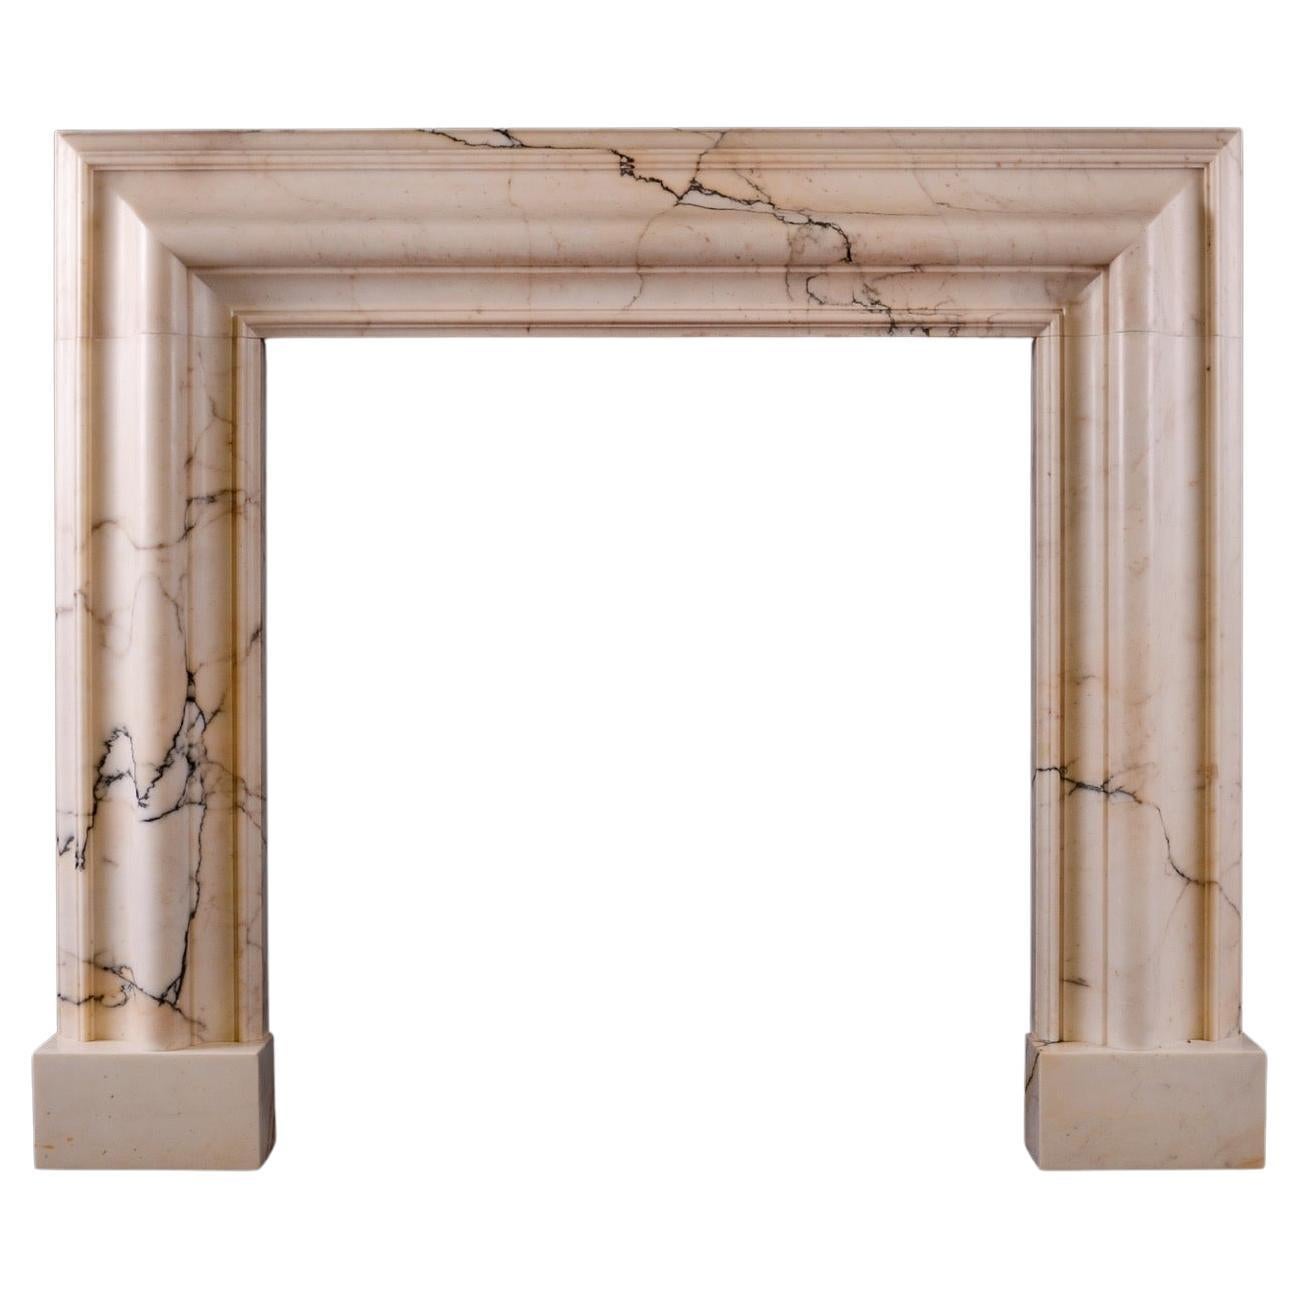 A Bolection Fireplace in Povanazzo Marble For Sale